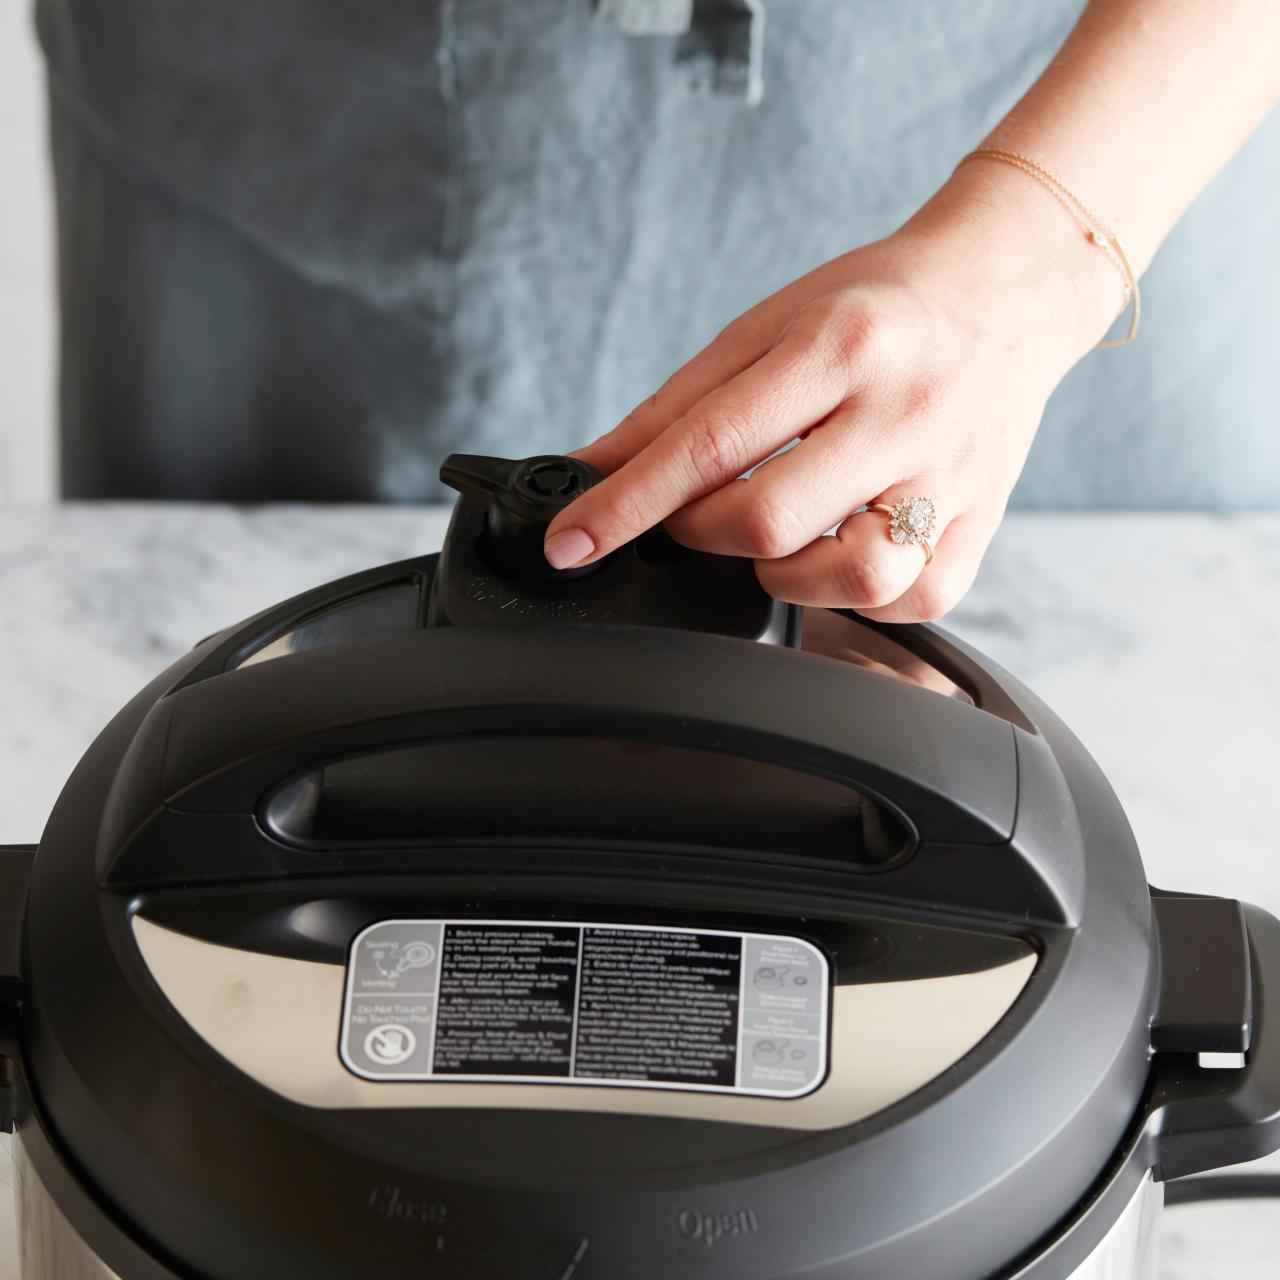 How to Instant Pot Natural Release & Quick Release Complete Guide